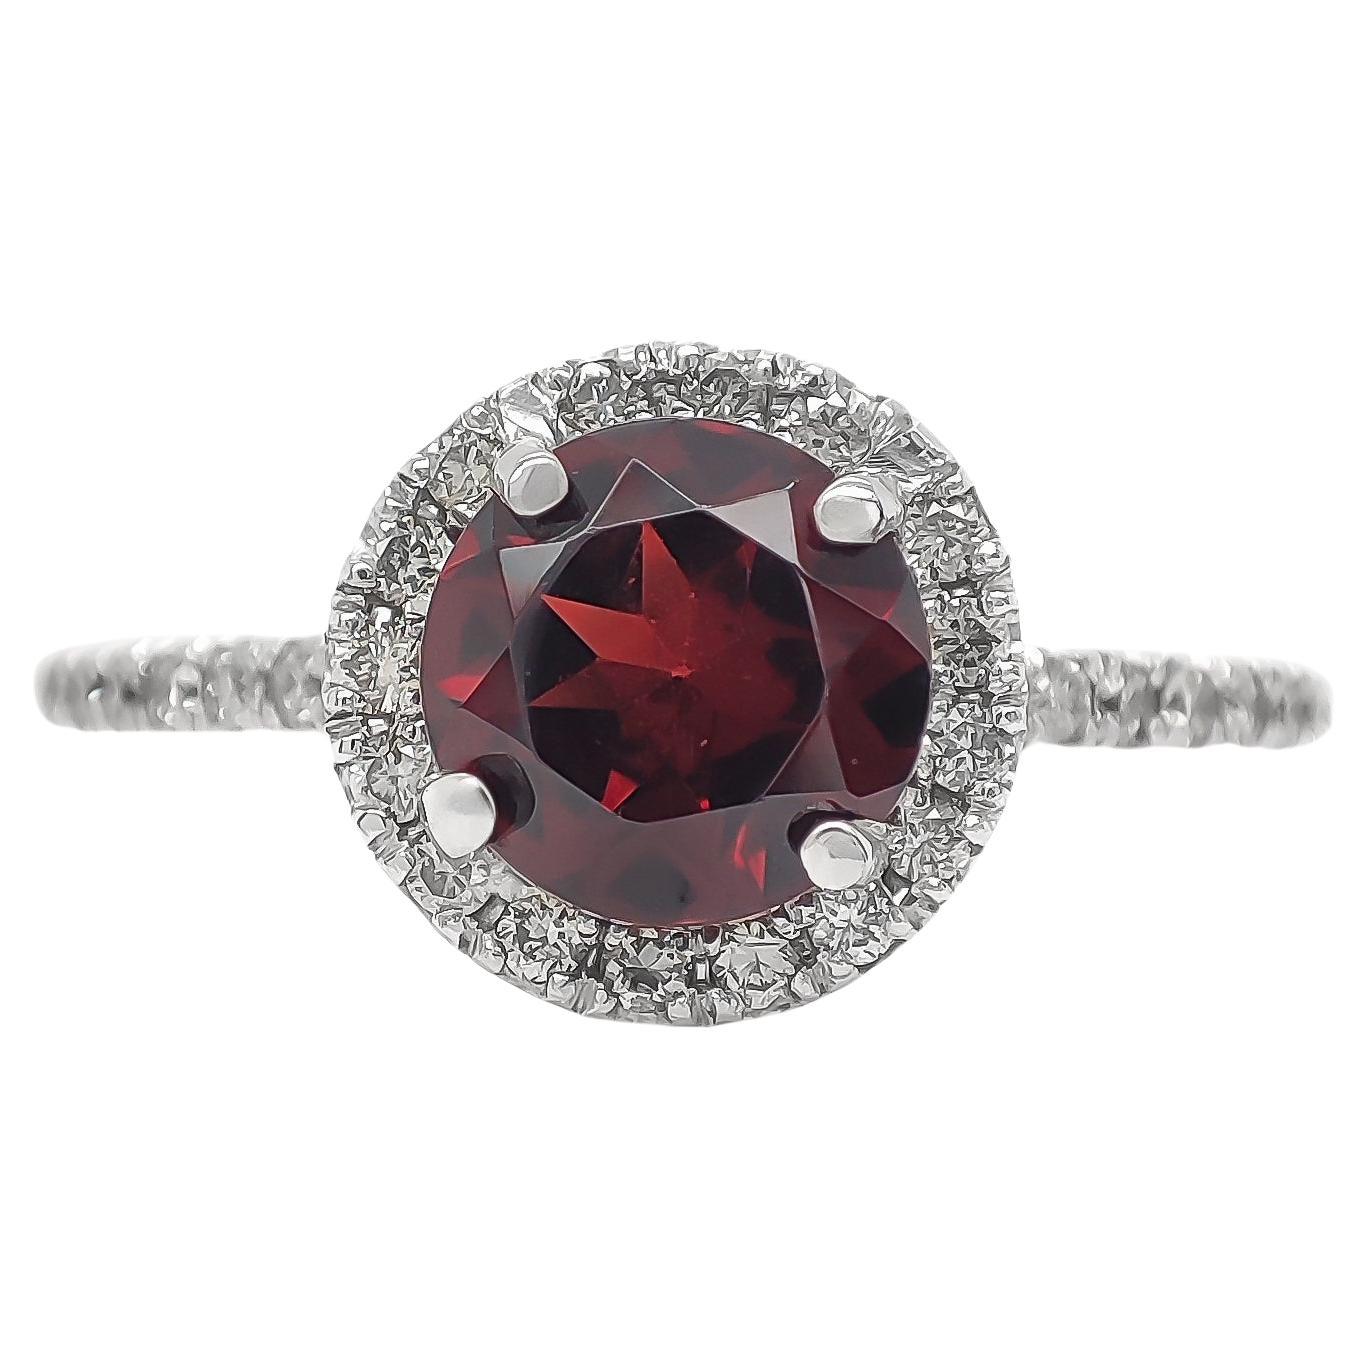 NO RESERVE 1.28CTW Garnet and Diamond Engagement Ring 14K White Gold